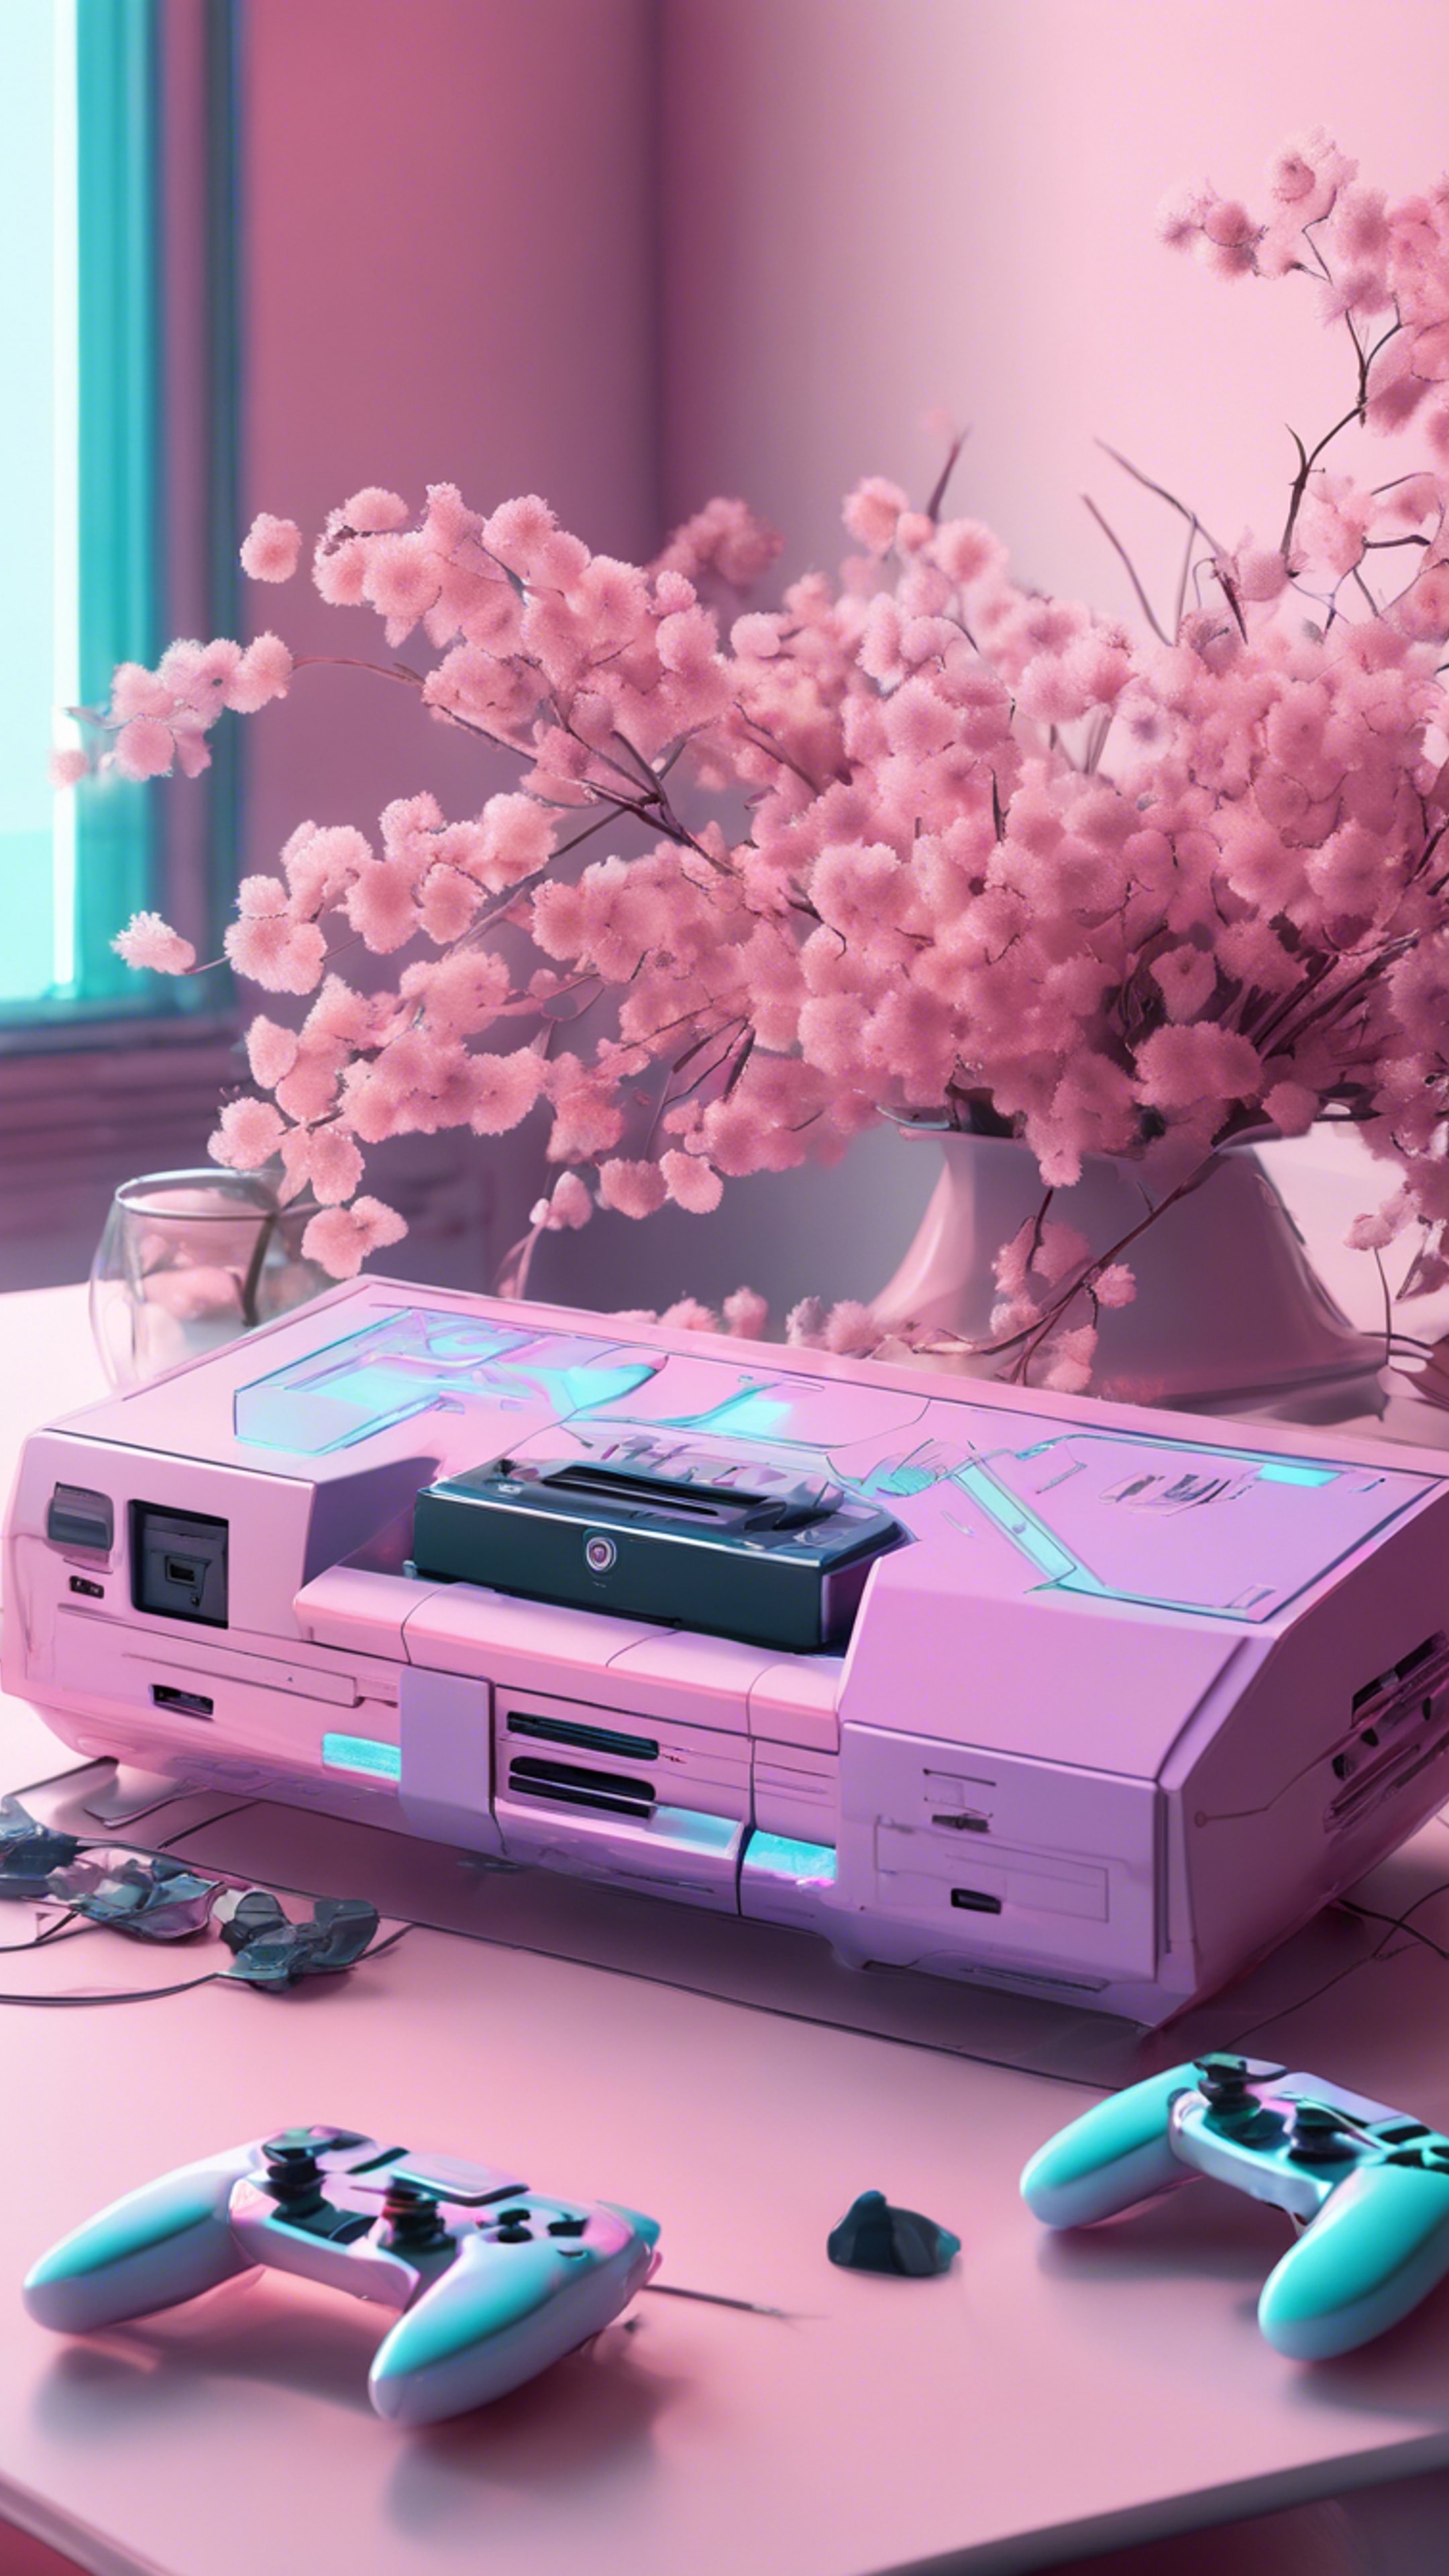 A pastel colored gaming console on a white table next to soft colored flowers in a daylight room. Divar kağızı[43bf14bcce304acdbb24]